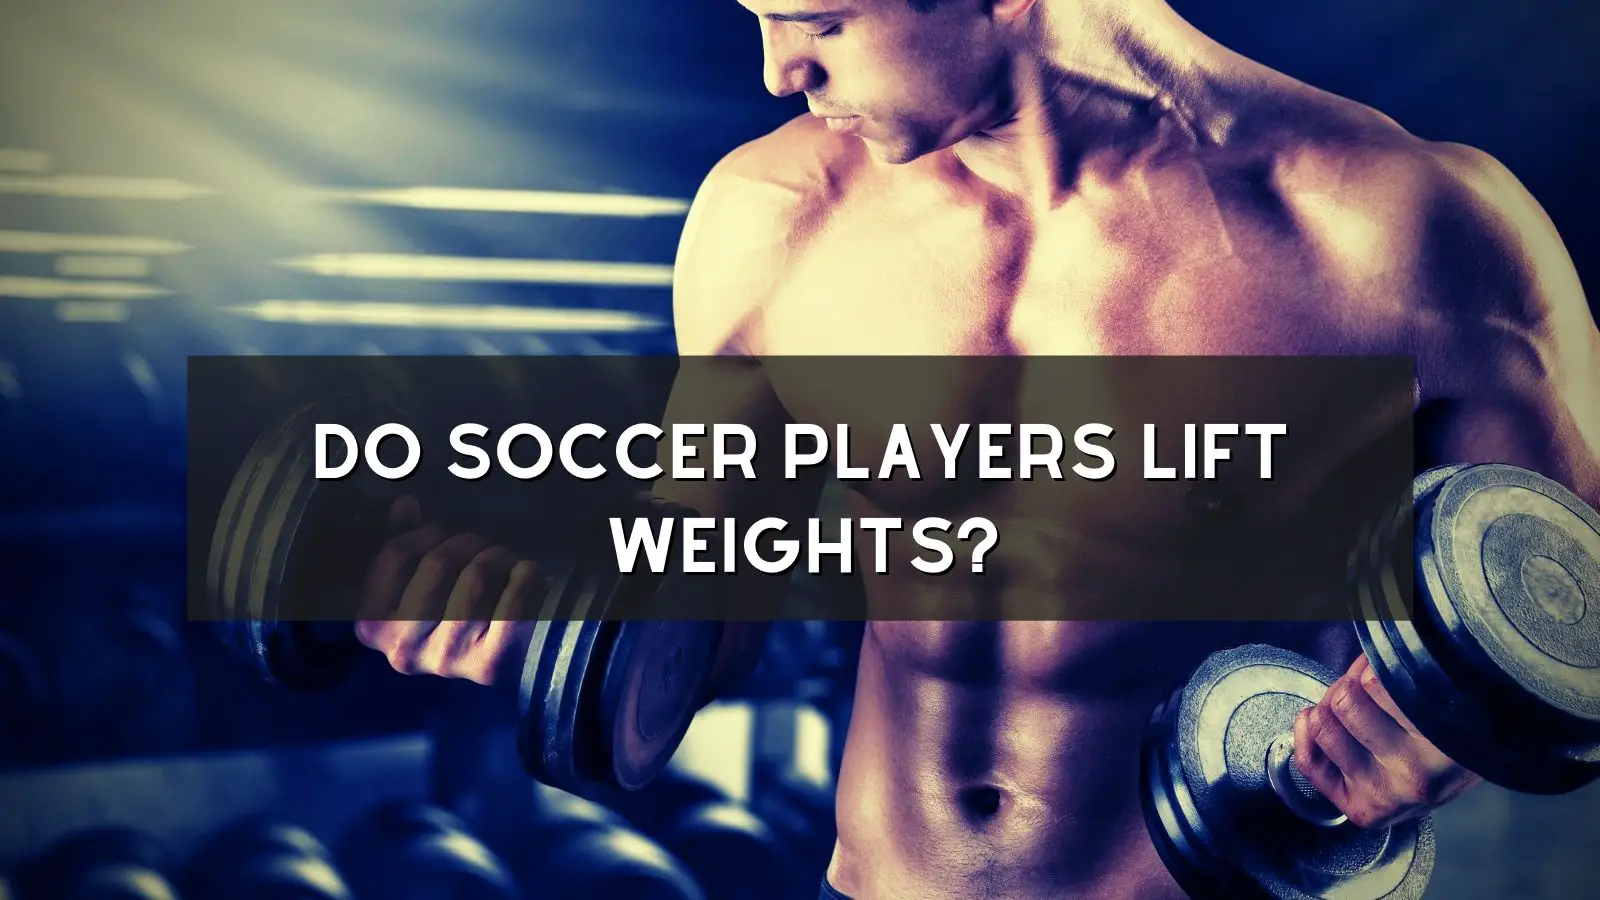 Do Soccer Players Lift Weights?